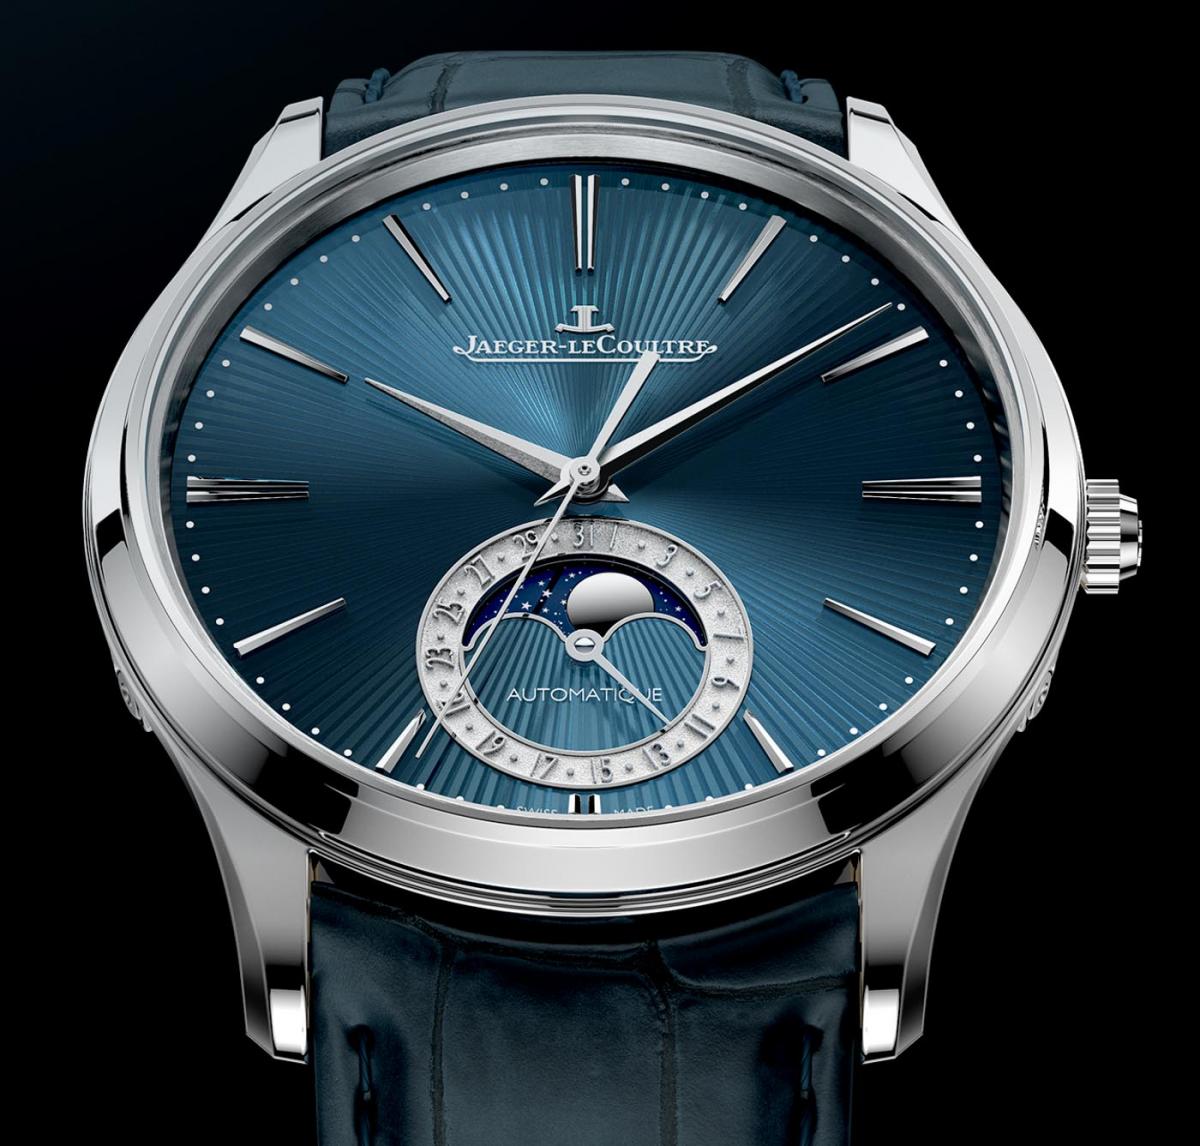 Jaeger-LeCoultre Master Ultra-Thin Moon Enamel gets a stunning guilloché enamelled dial for SIHH 2019